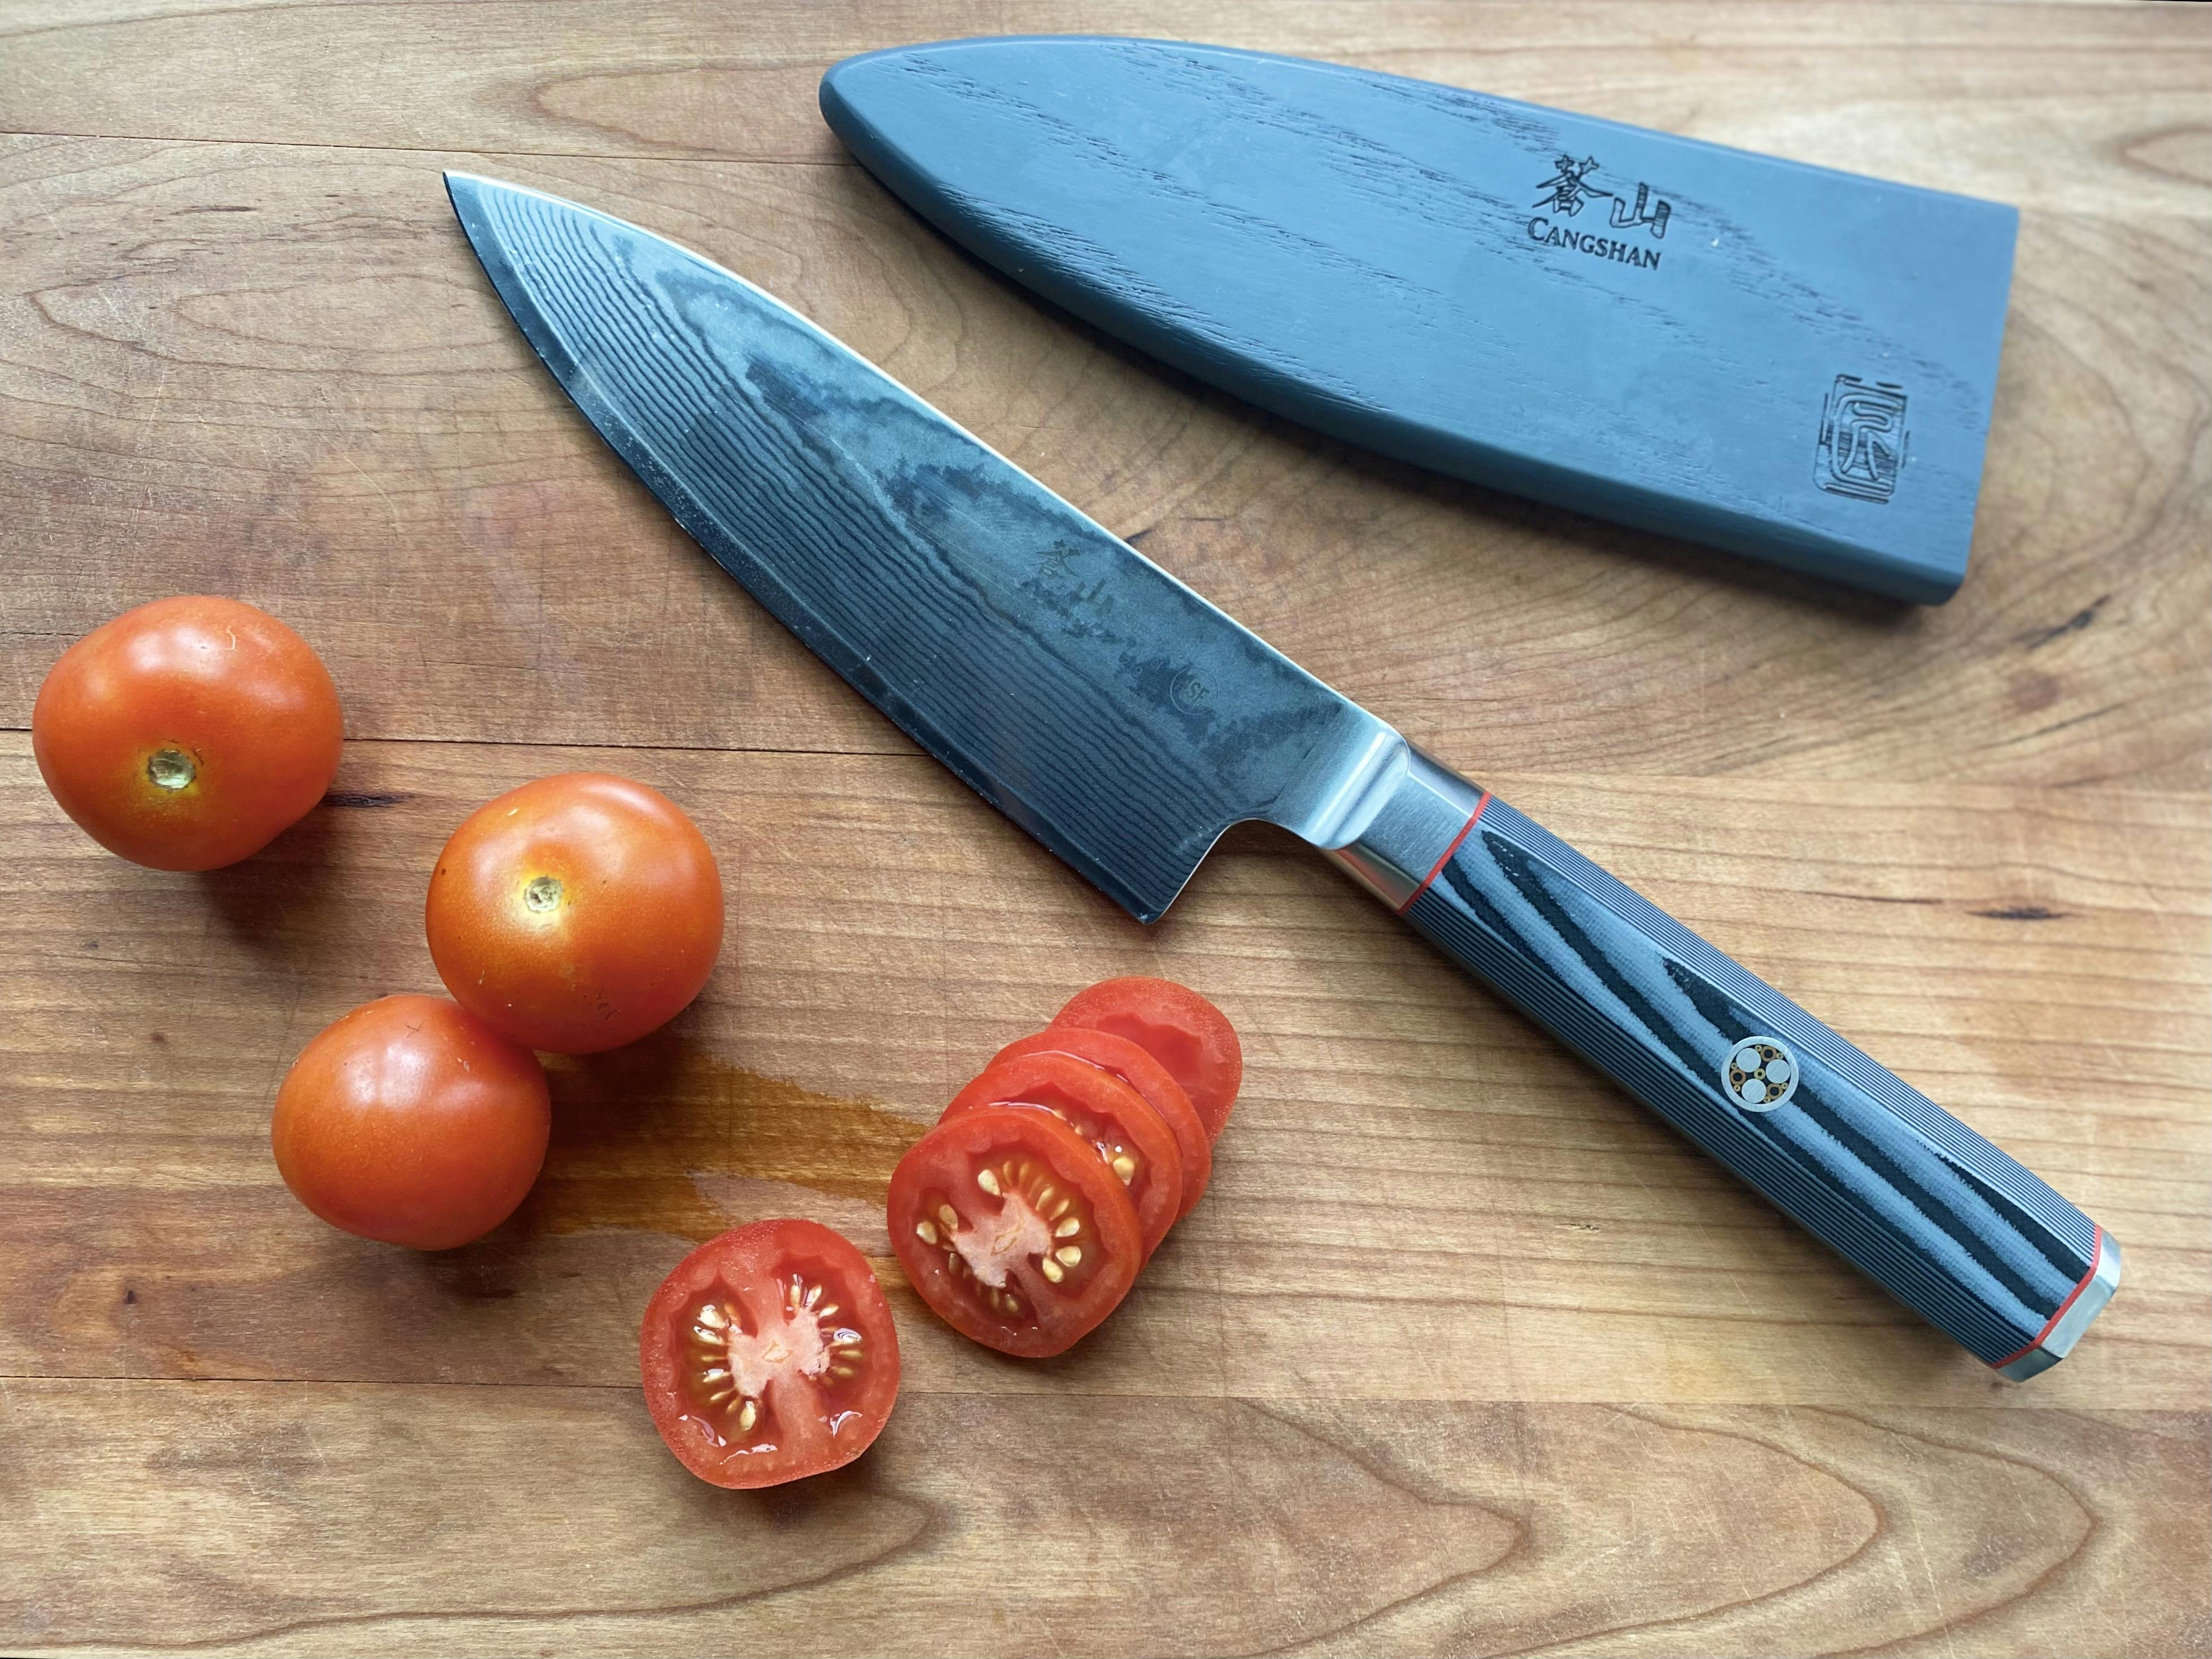 Cangshan Knife Set Review: Olive wood handles offer durability and